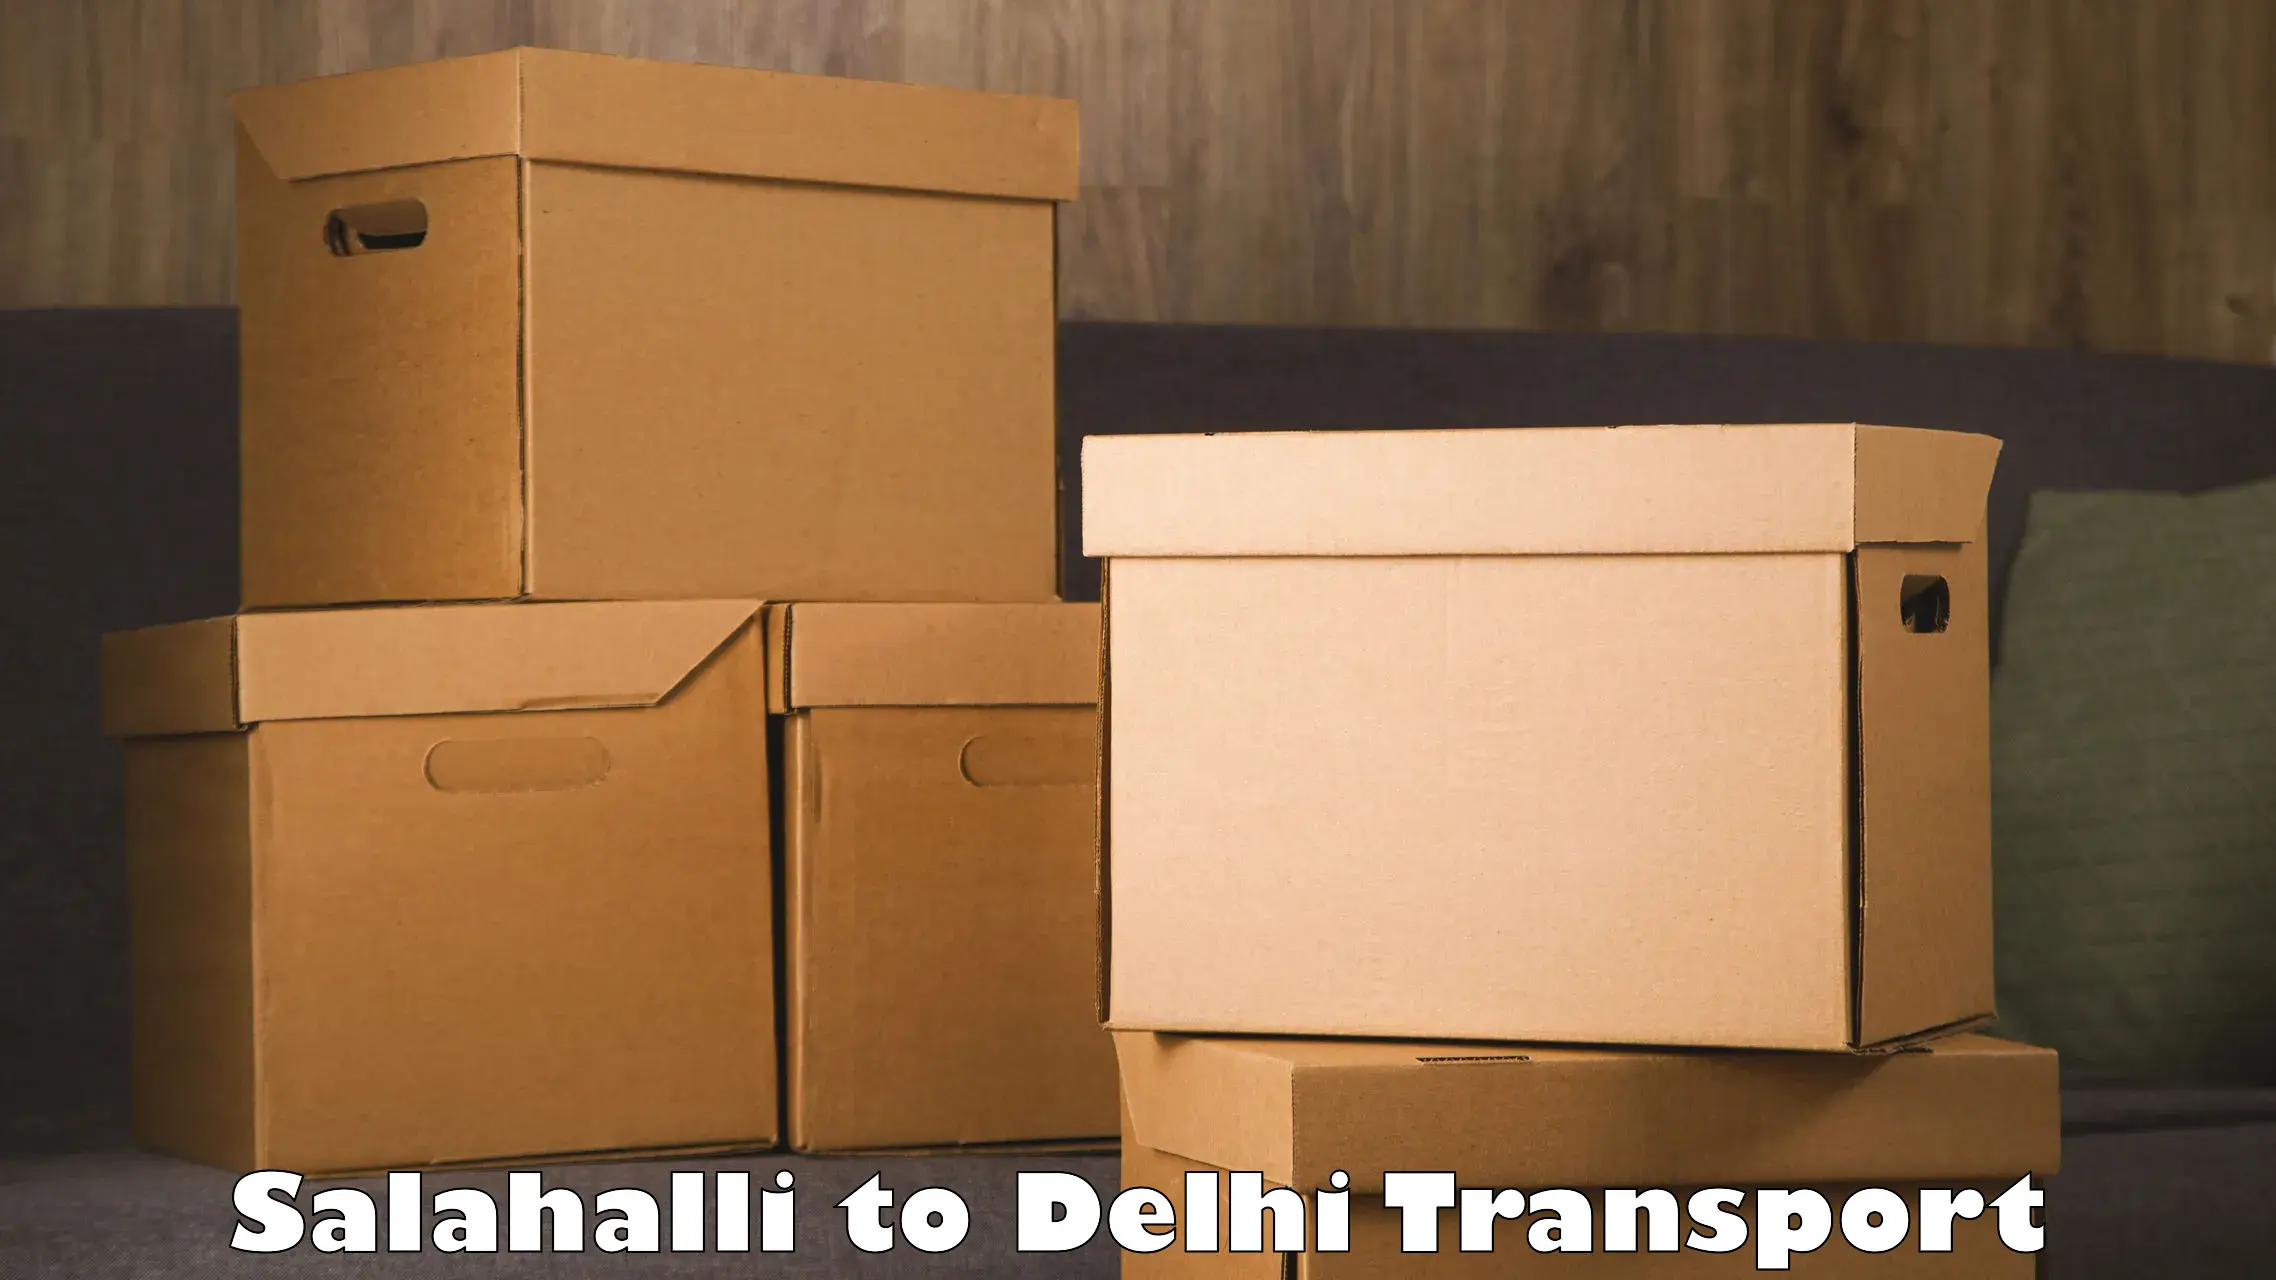 Commercial transport service Salahalli to NCR